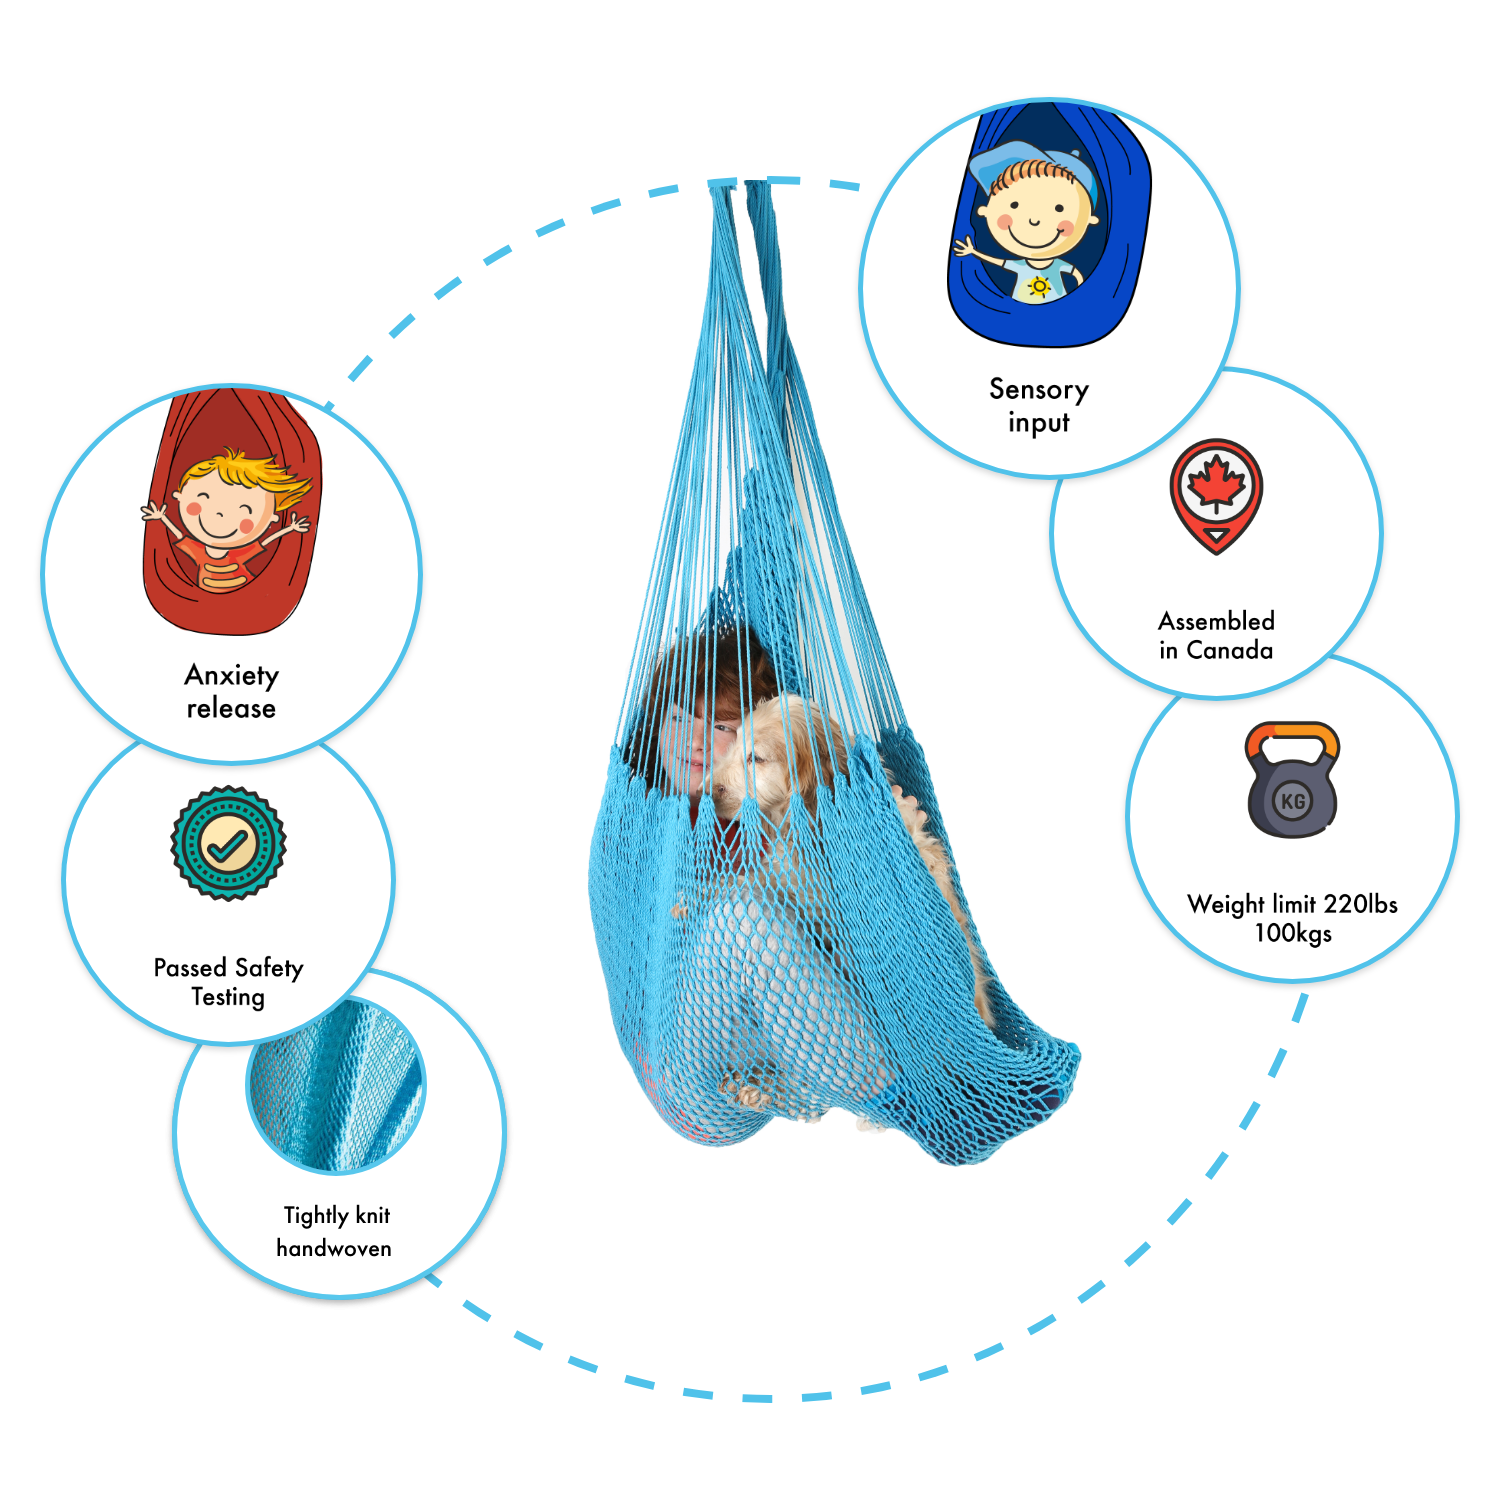 A boy and his dog are sitting in a blue hammock swing with features and benefits listed around: anxiety release, sensory input, passed safety testing, assembled in Canada, Tightly knit handwoven material, weight limit 220lbs.